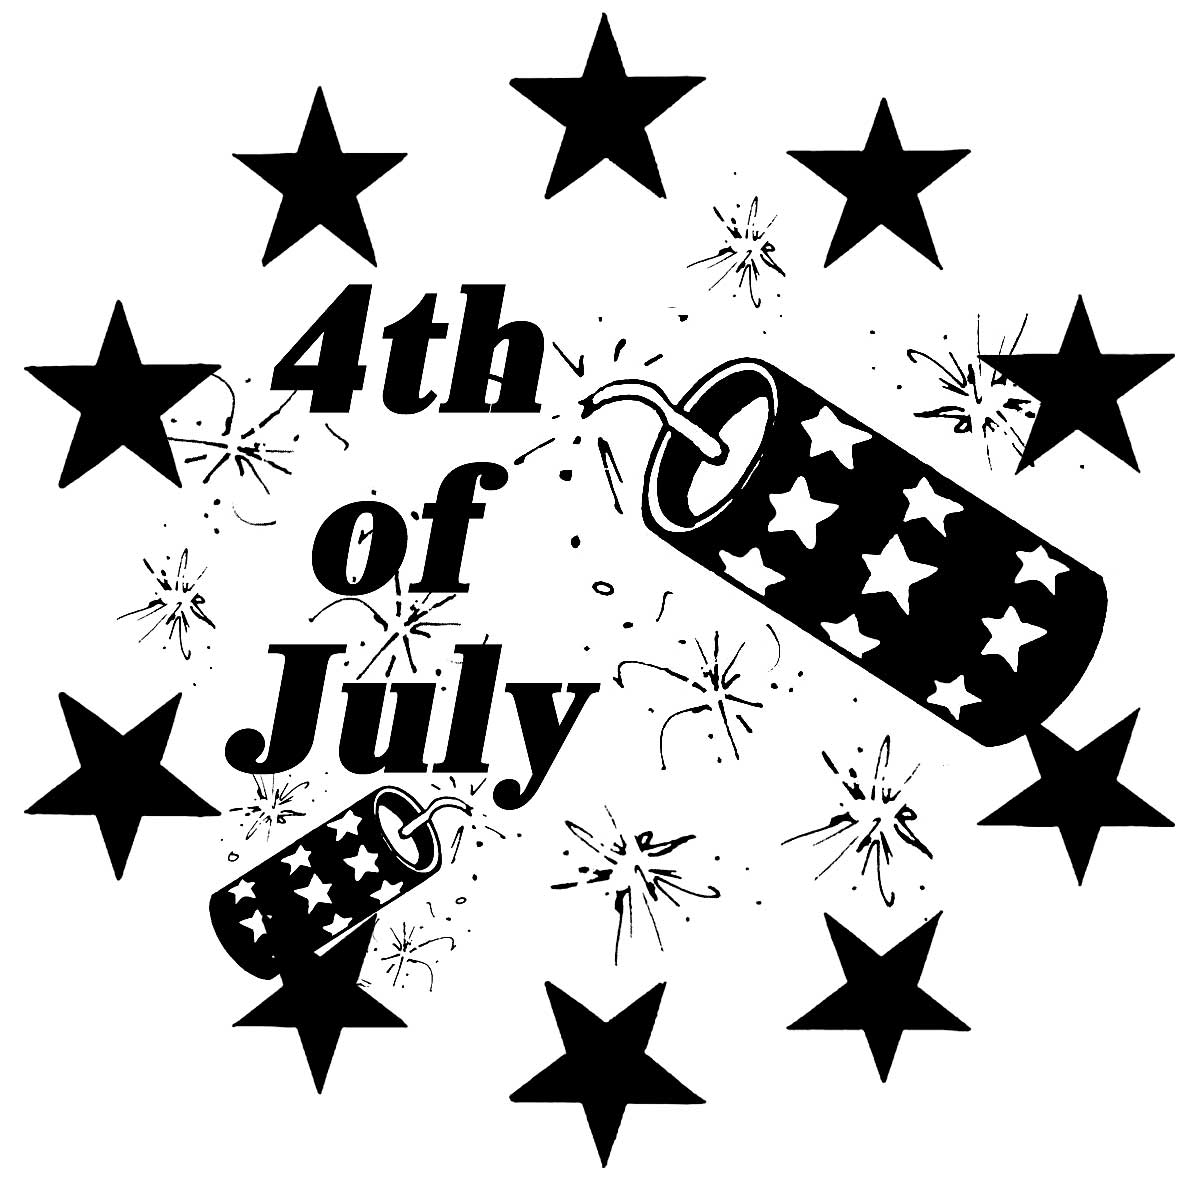 4th of July Firecracker Public Domain Clip Art Photos and Images